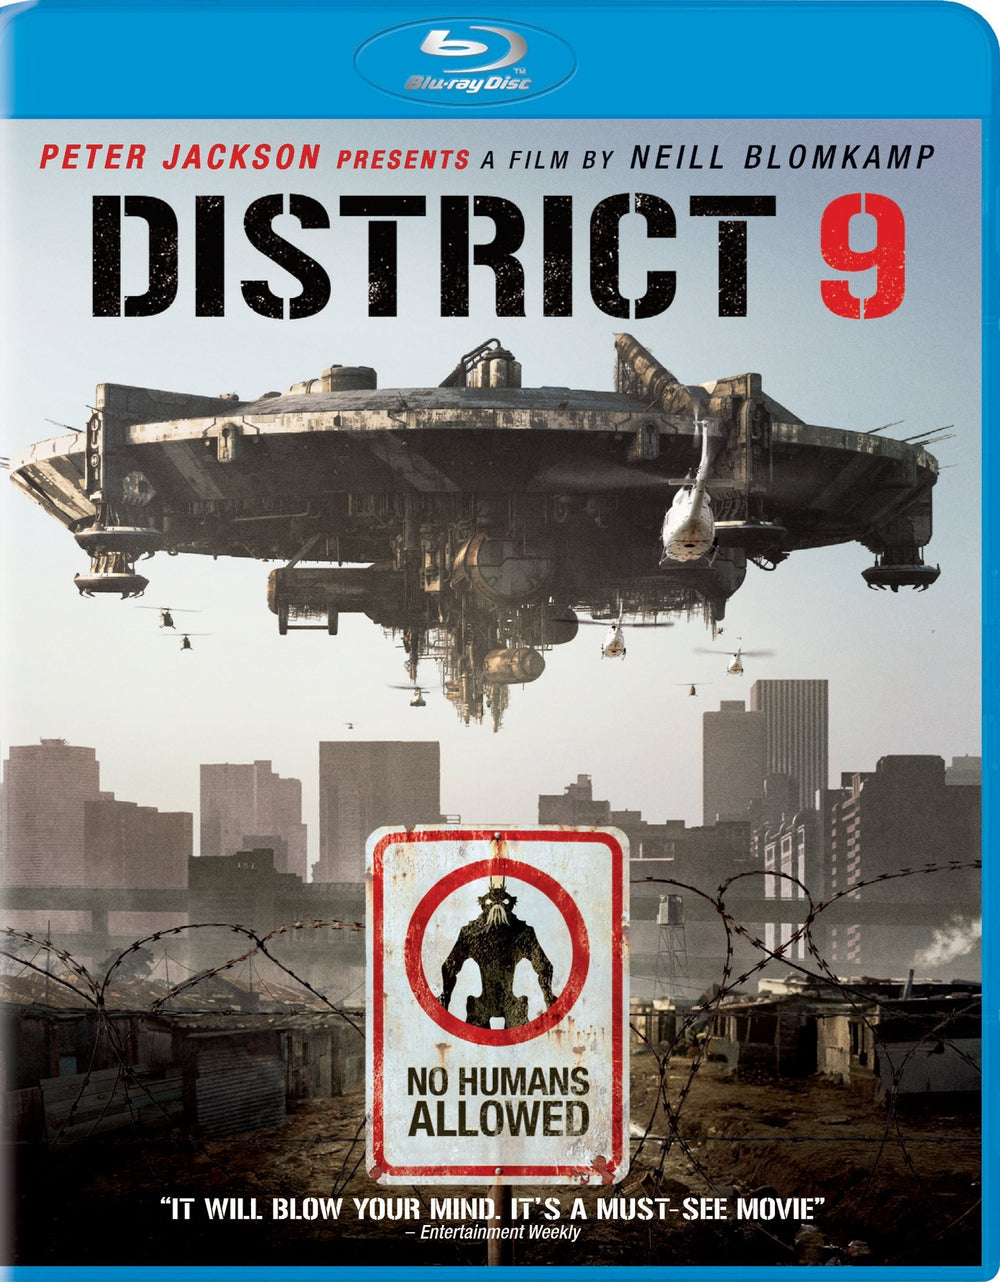 District 9 Blu-ray Used